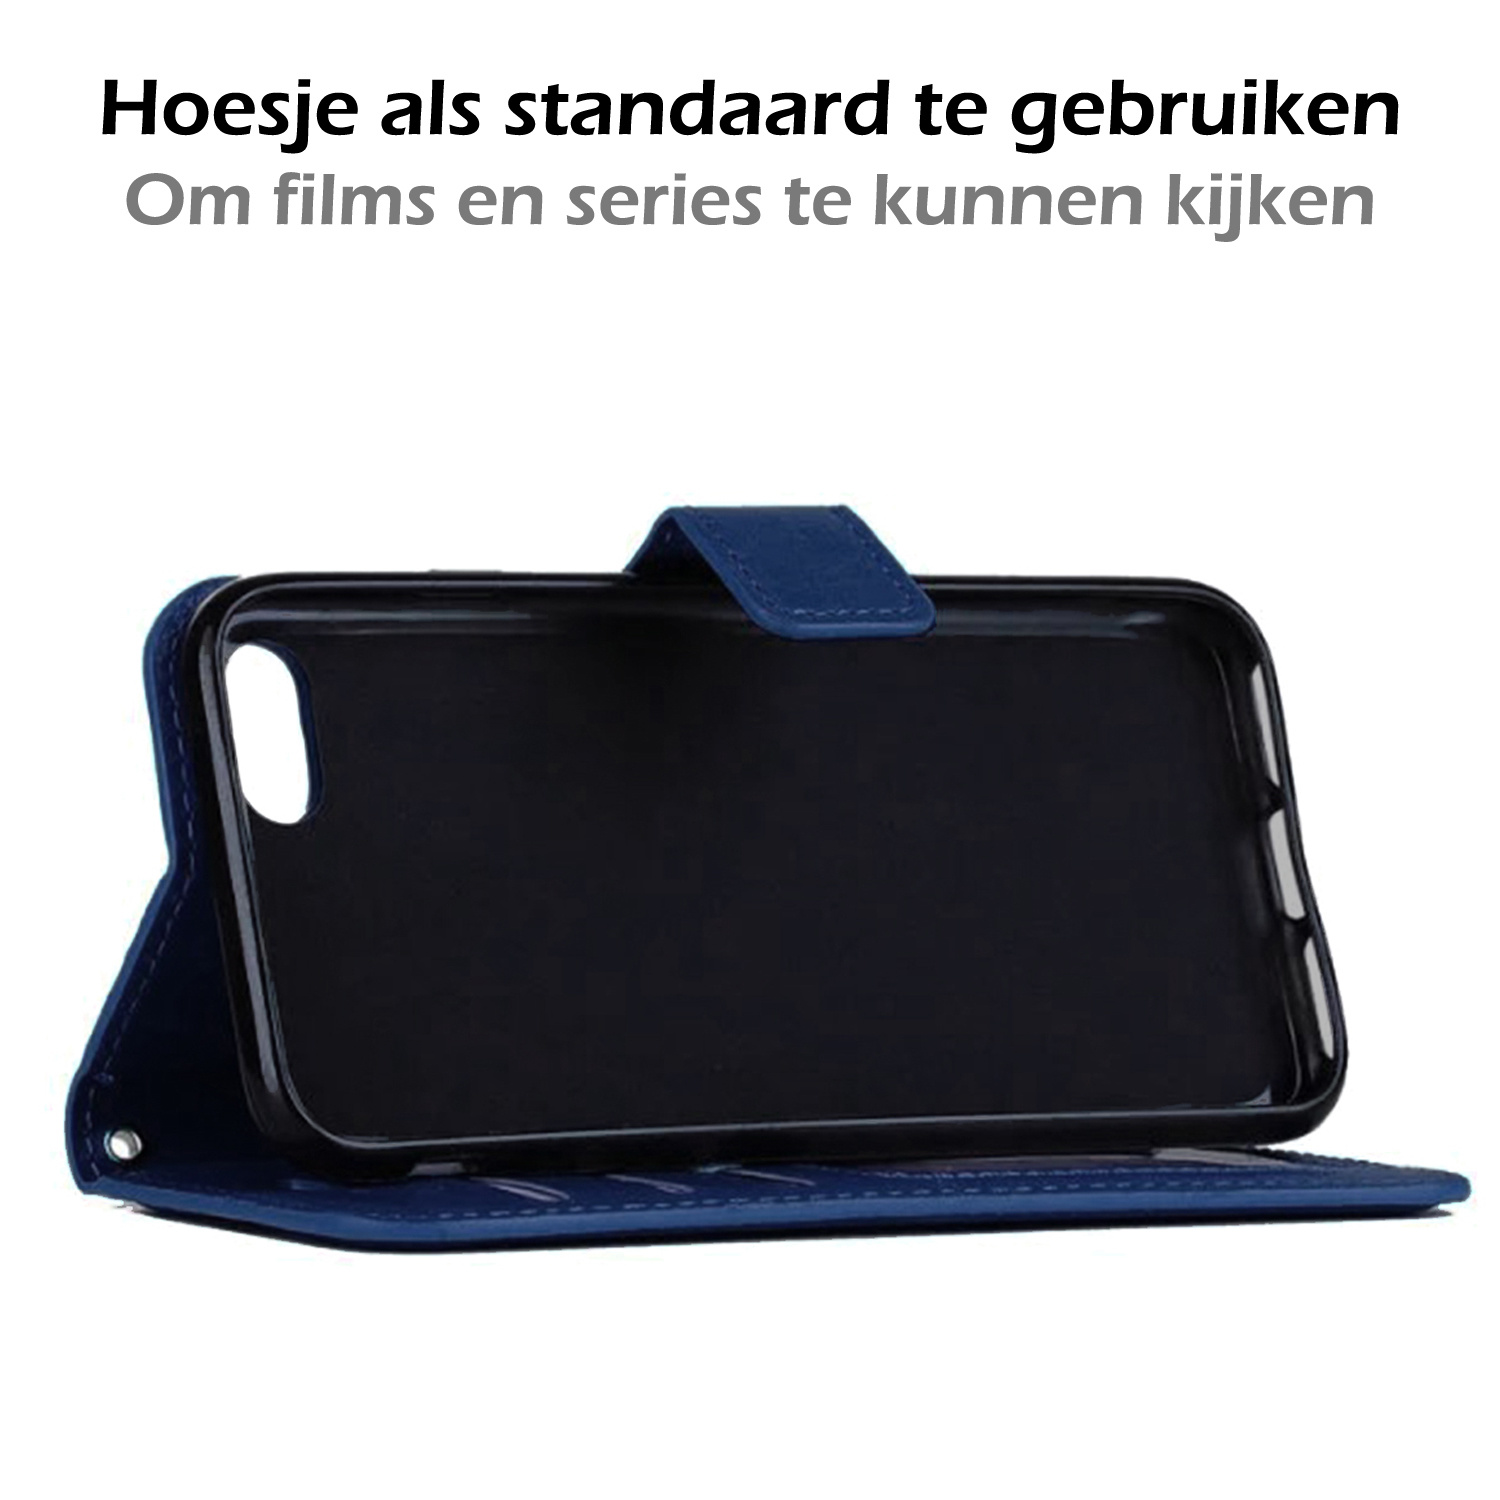 Nomfy Hoes voor iPhone 7 Hoes Bookcase Flipcase Book Cover - Hoes voor iPhone 7 Hoesje Book Case - Donker Blauw